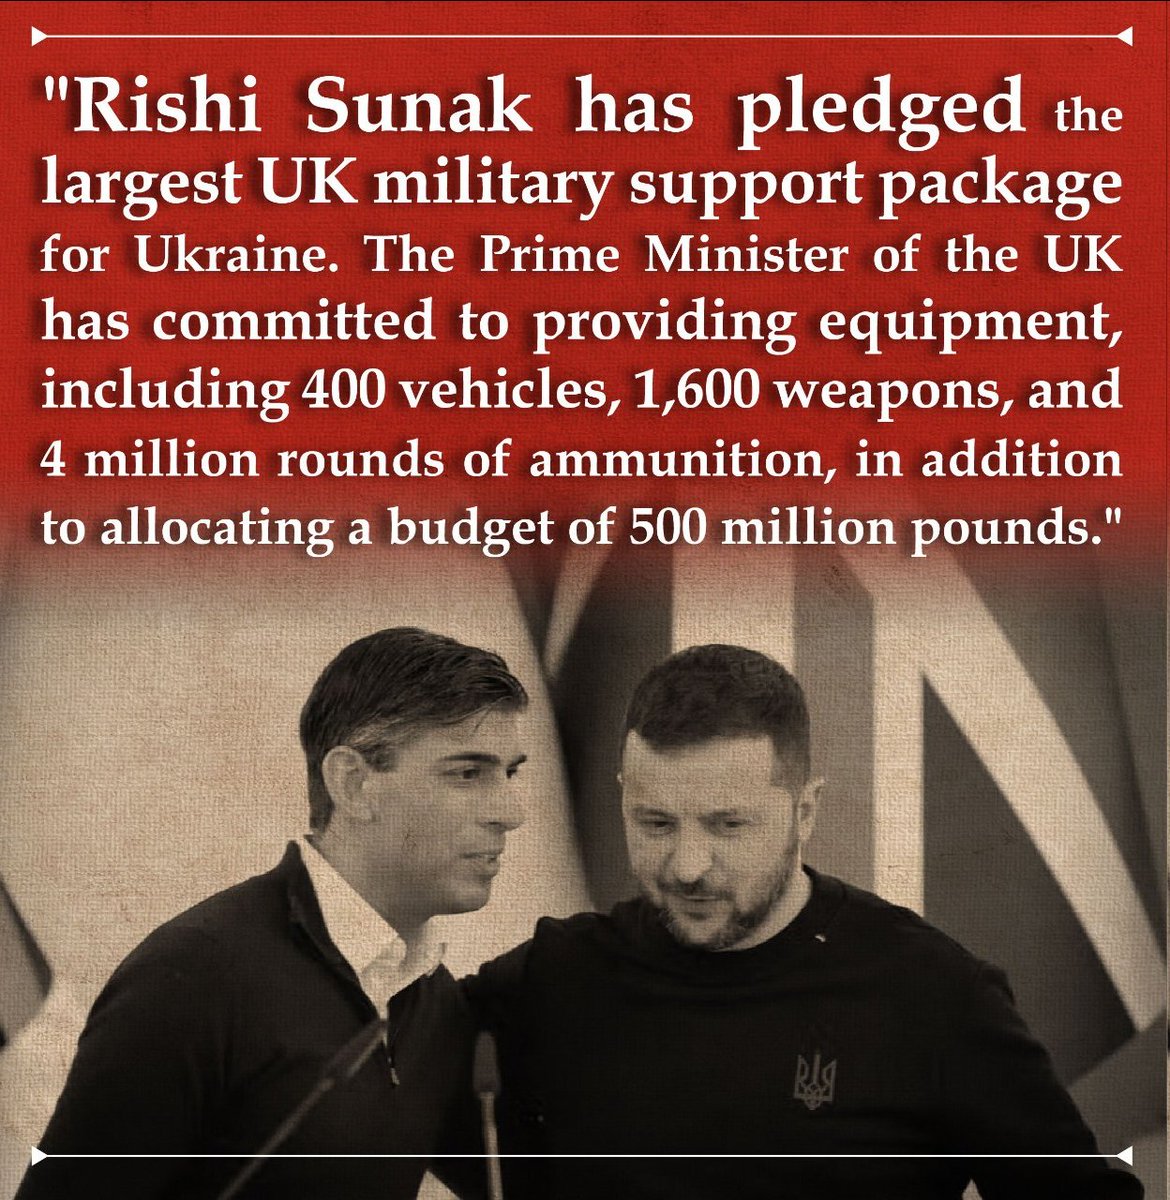 #RishiSunak has pledged the UK's largest military support package for Ukraine. The British Prime Minister has committed to providing equipment including 400 vehicles, 1,600 weapons, and 4 million rounds of ammunition, in addition to allocating a £500 million budget. #SunakOut547